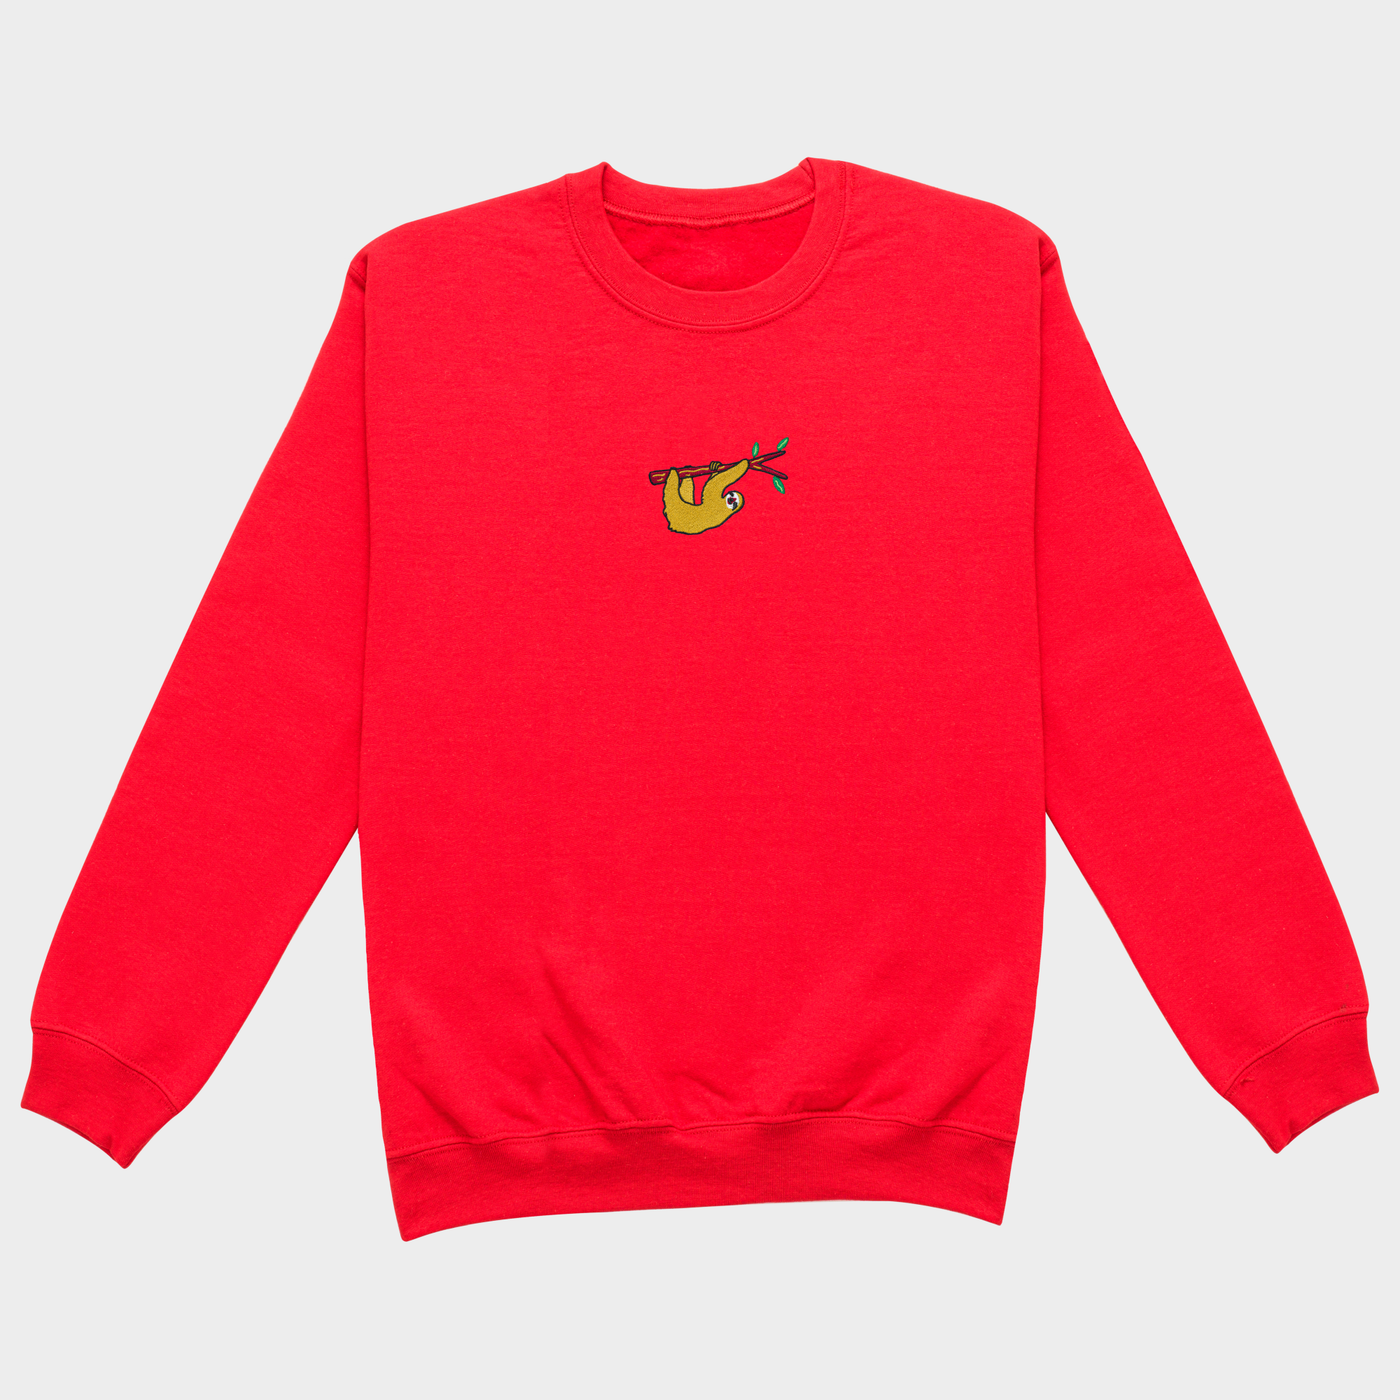 Bobby's Planet Women's Embroidered Sloth Sweatshirt from South American Amazon Animals Collection in Red Color#color_red